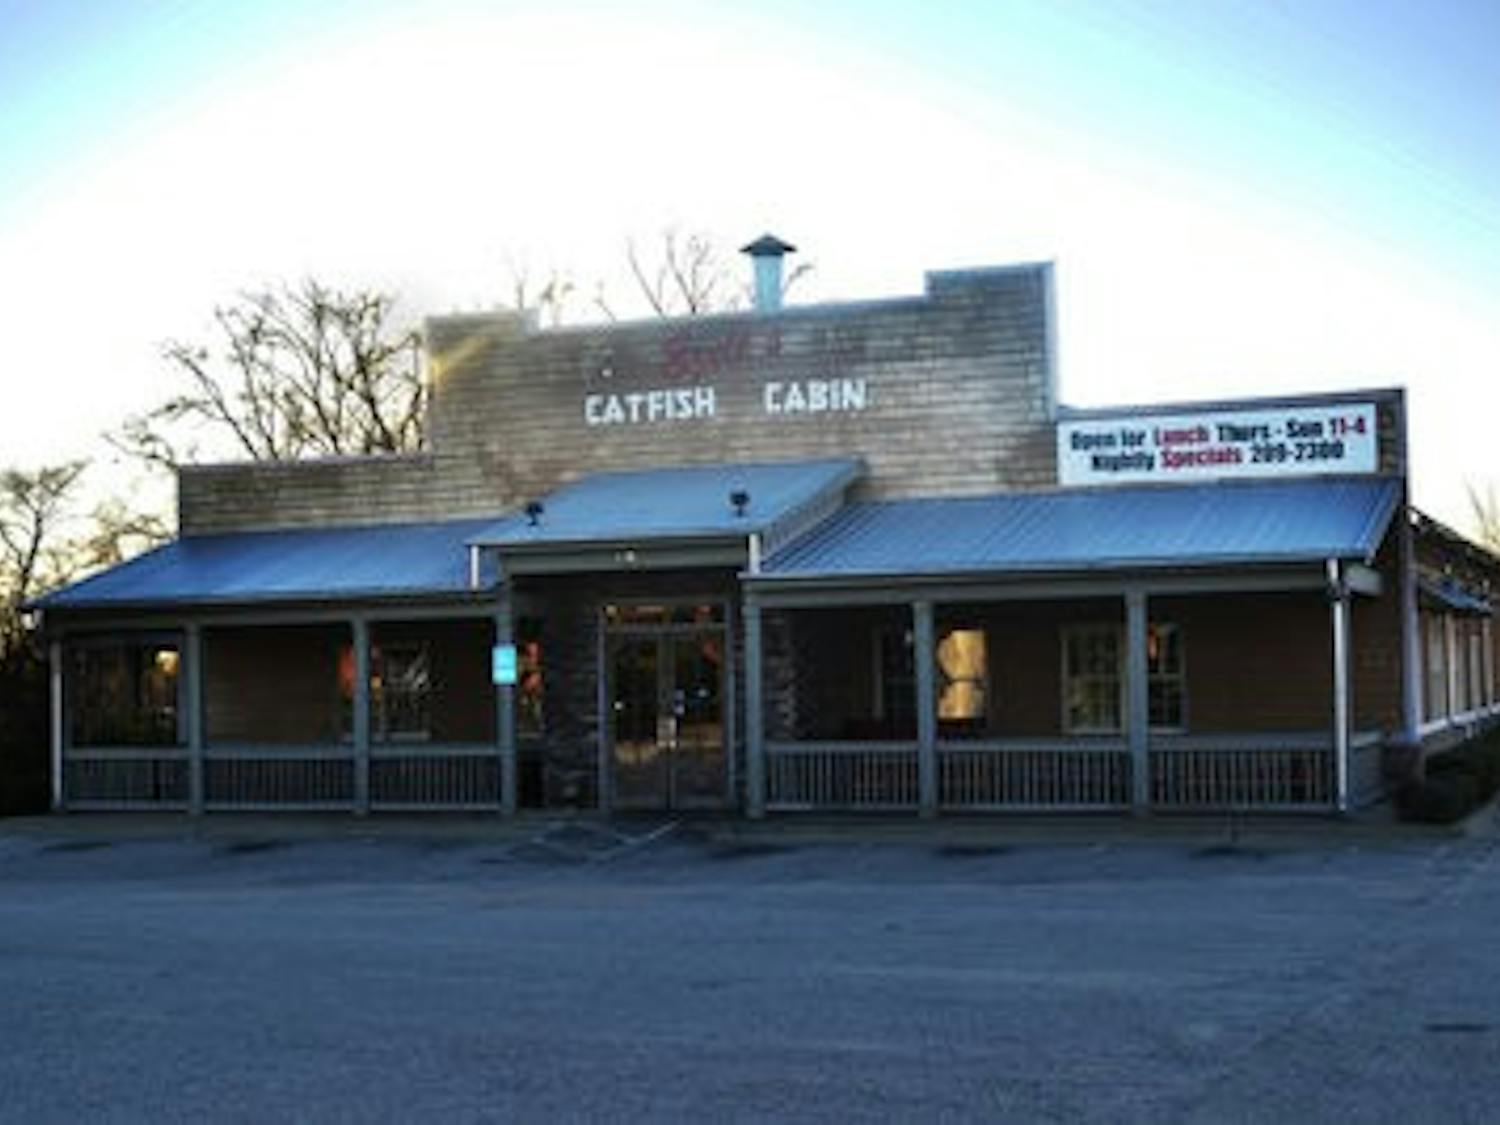 Ezell's Catfish Cabin, formerly located on South College Street, closed last year due to rising rent and lack of student interest, said director of operations Frank Cantrell. (Danielle Lowe / ASSISTANT PHOTO EDITOR)